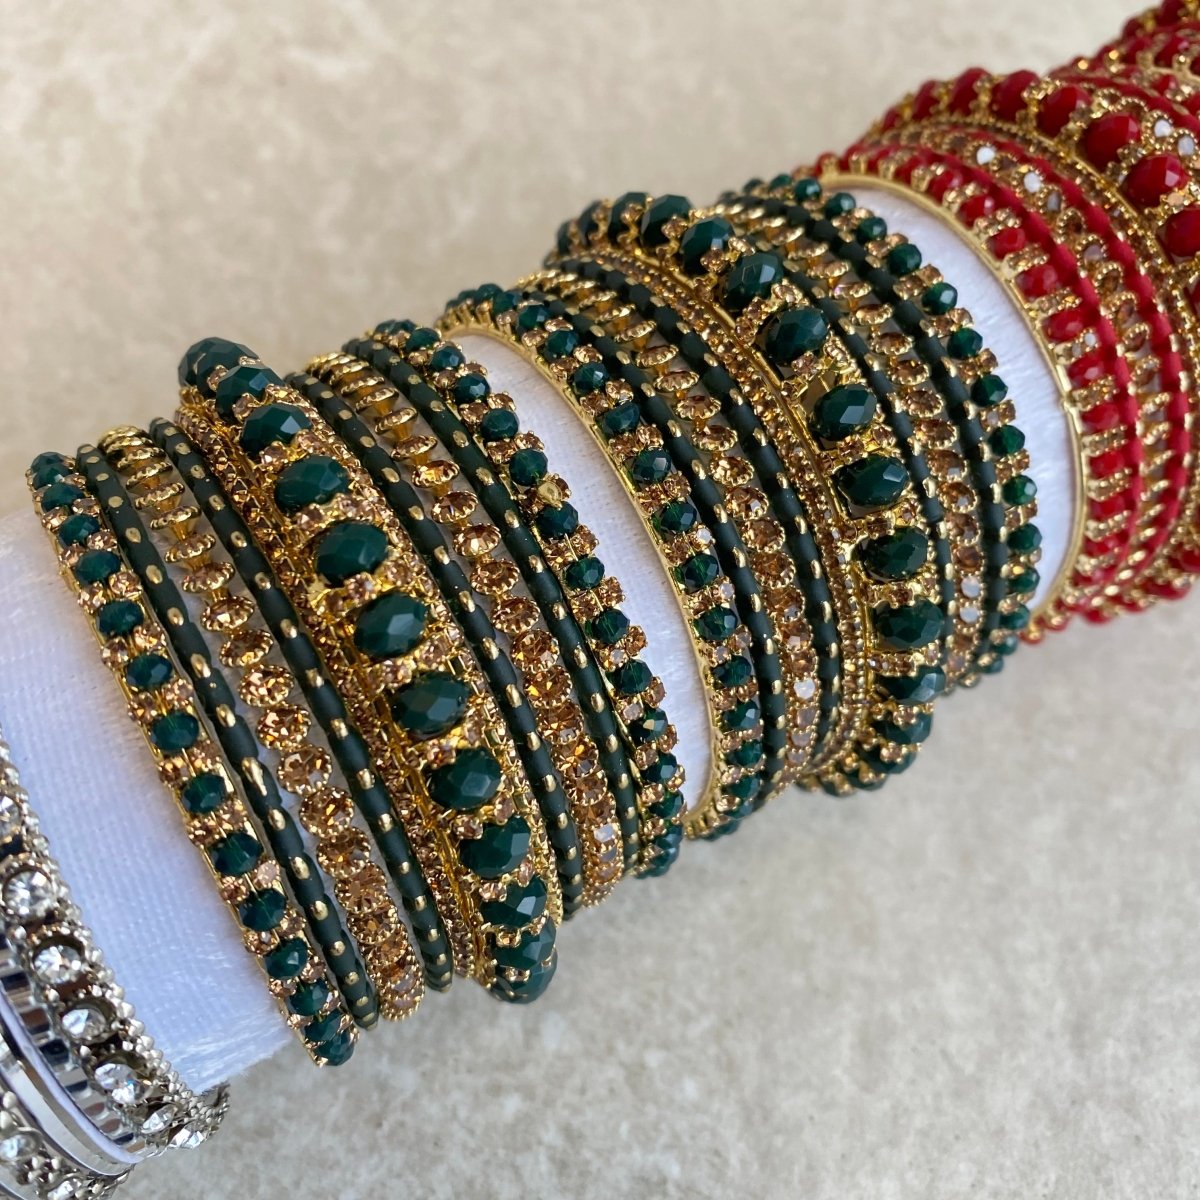 (Slightly less than perfect) 2.4 Clearance Mini Bangle Set x3 - SOKORA JEWELS(Slightly less than perfect) 2.4 Clearance Mini Bangle Set x3BANGLES